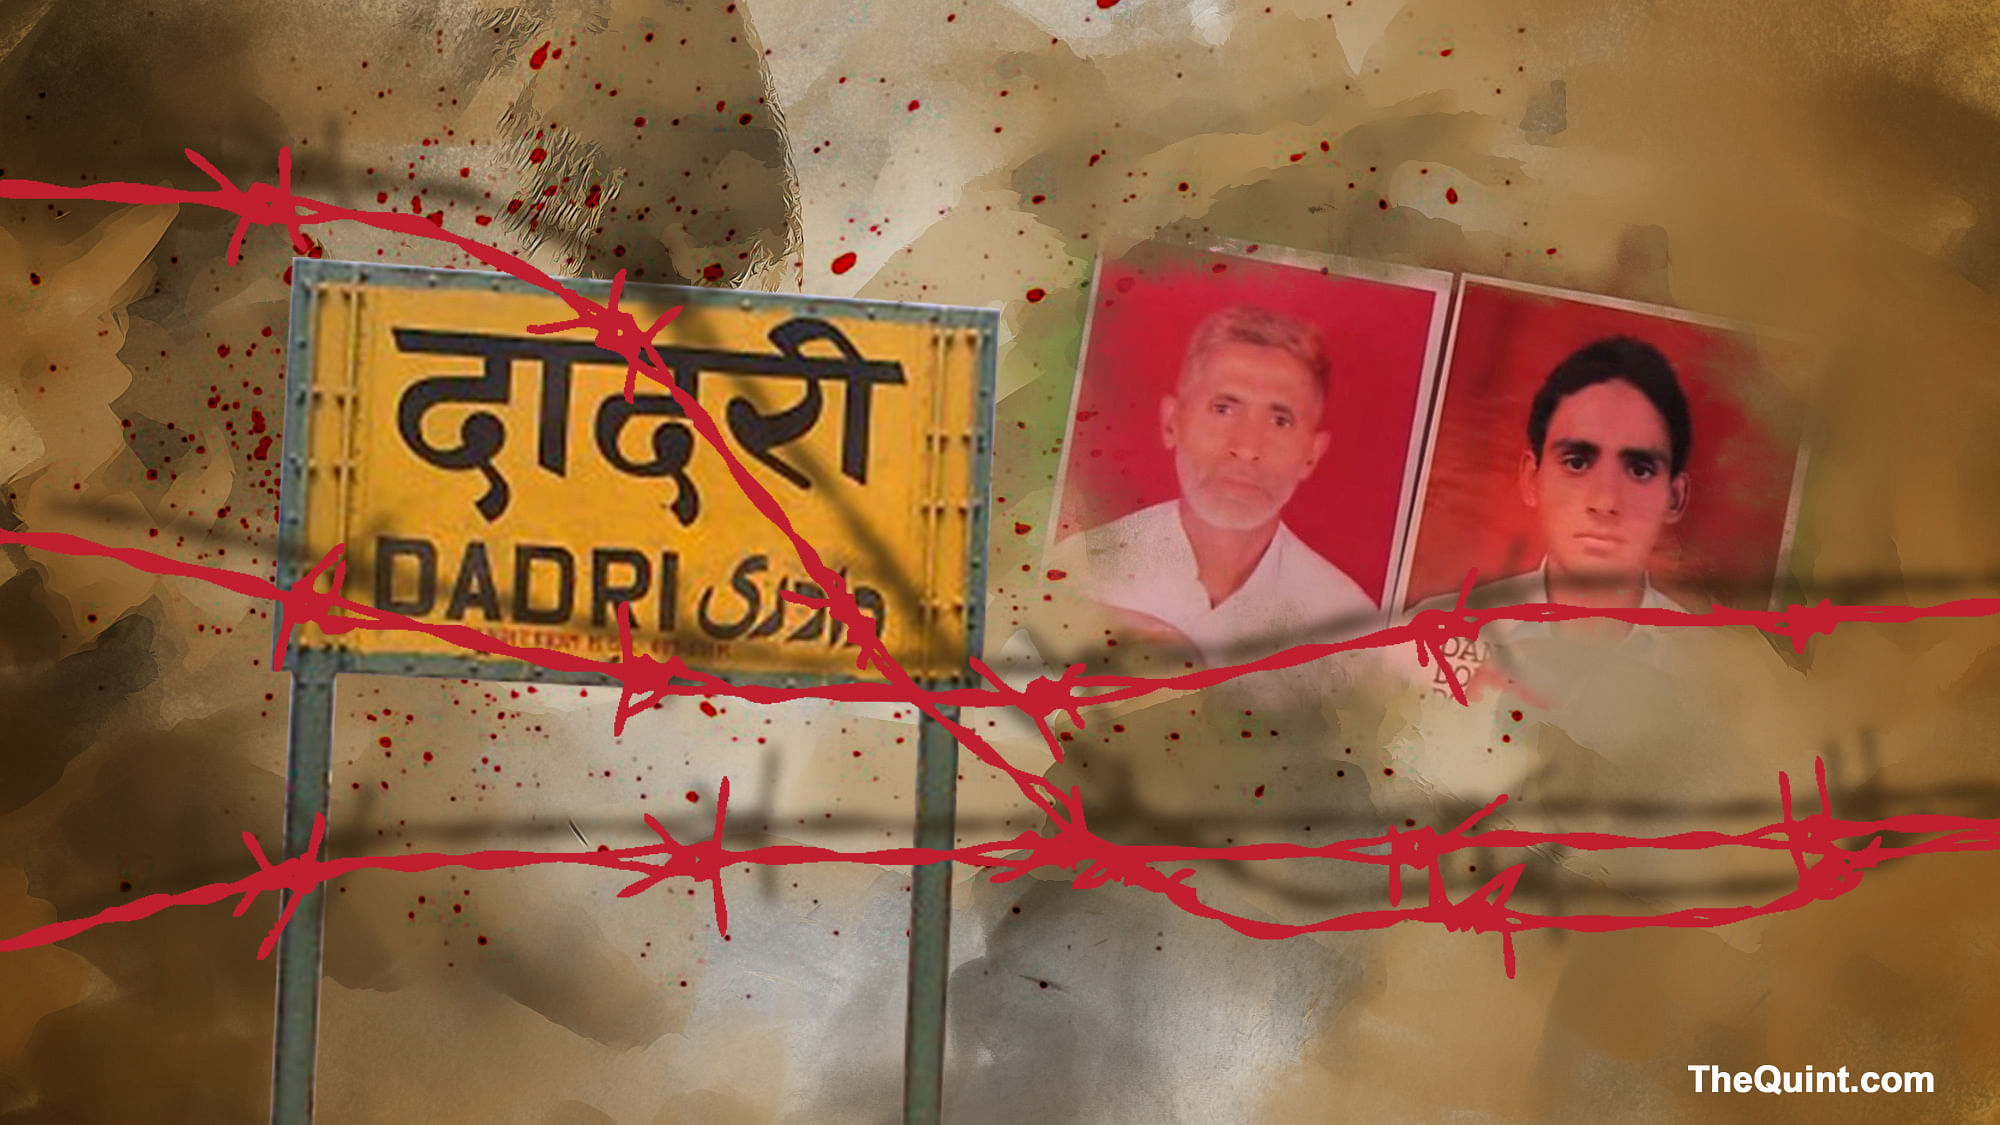 Akhlaq and his son, Danish, were dragged out of their house on the night of 28 September 2015 in Bisada, Dadri, and lynched on suspicion of consuming beef. 